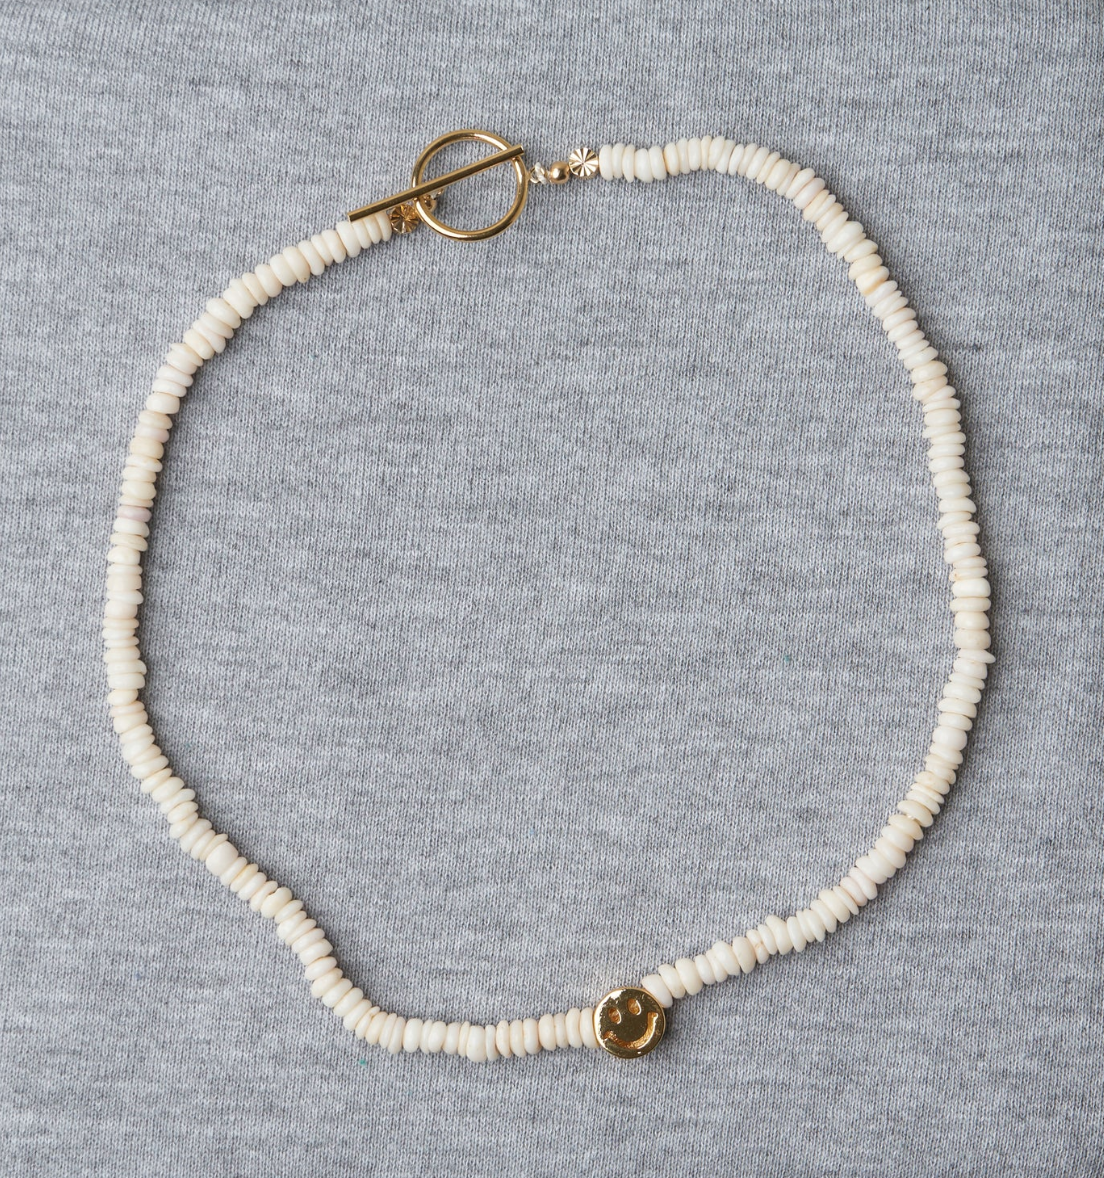 An elegant Puka Gold Smiley Choker necklace with white beads and a small gold-filled clasp, displayed on a light gray fabric background by Aquarius Cocktail.